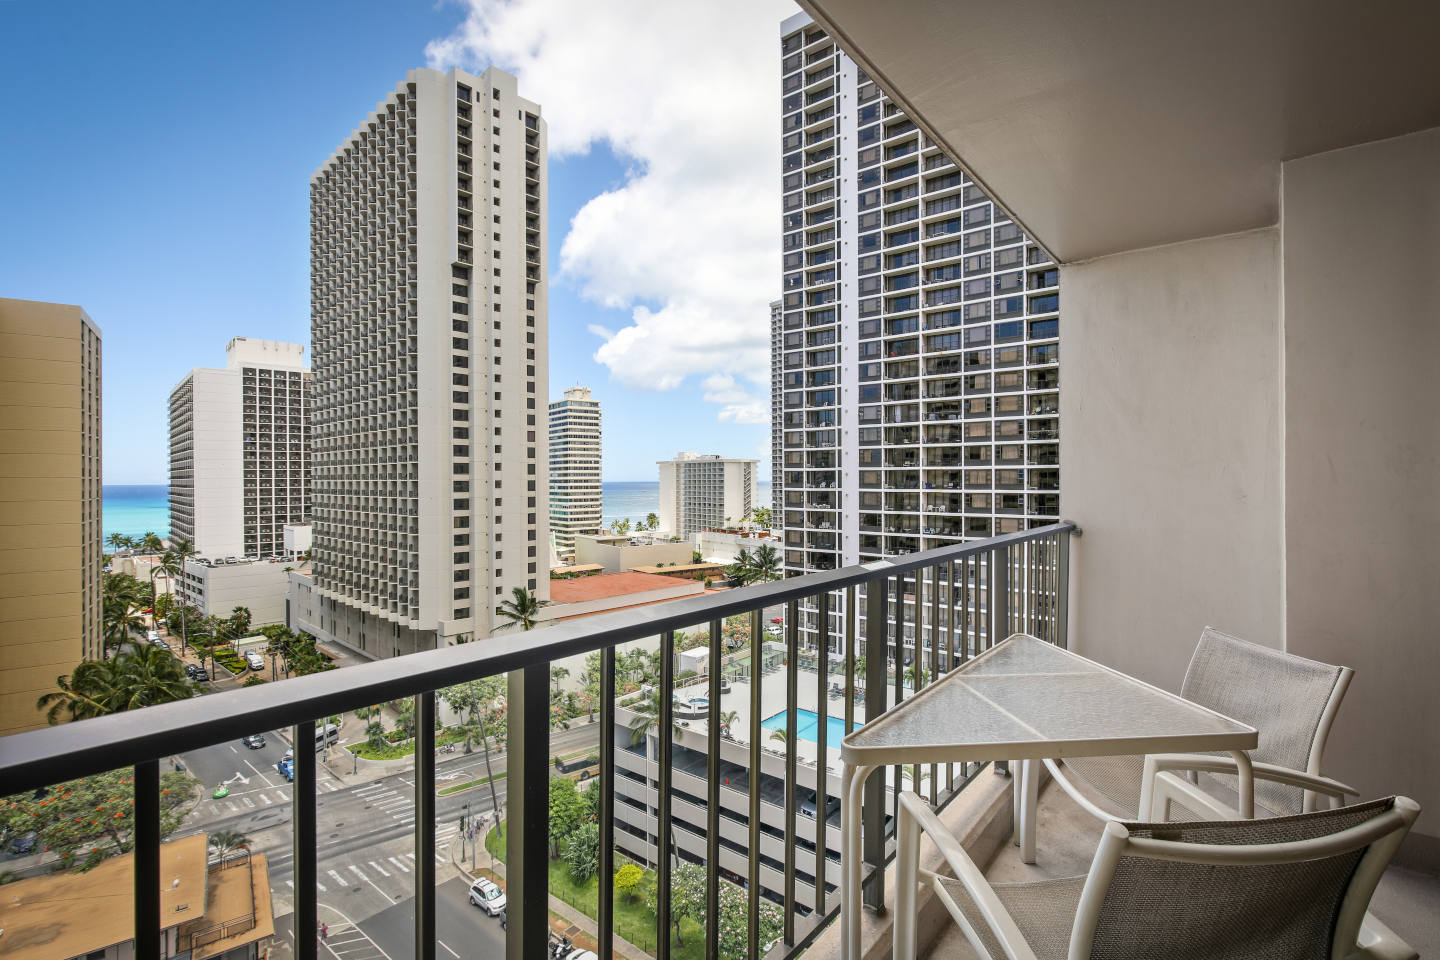 Aston Waikiki Sunset 1Bedroom Partial Ocean View Balcony with seating to enjoy the view